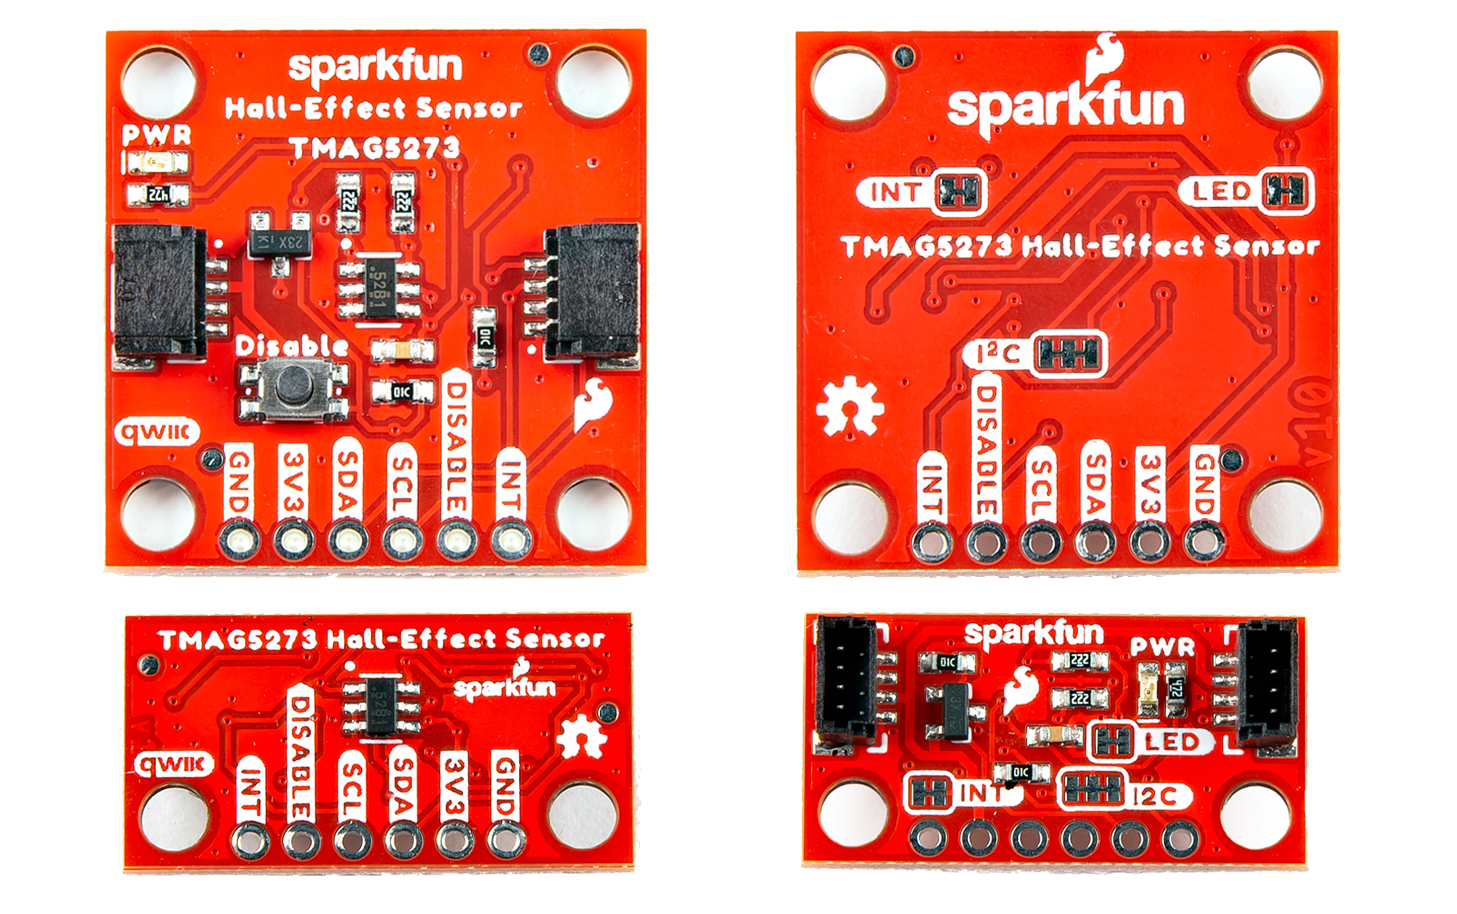 SparkFun’s New TMAG5273 3D Hall-Effect Sensor Features Qwiic Connectors